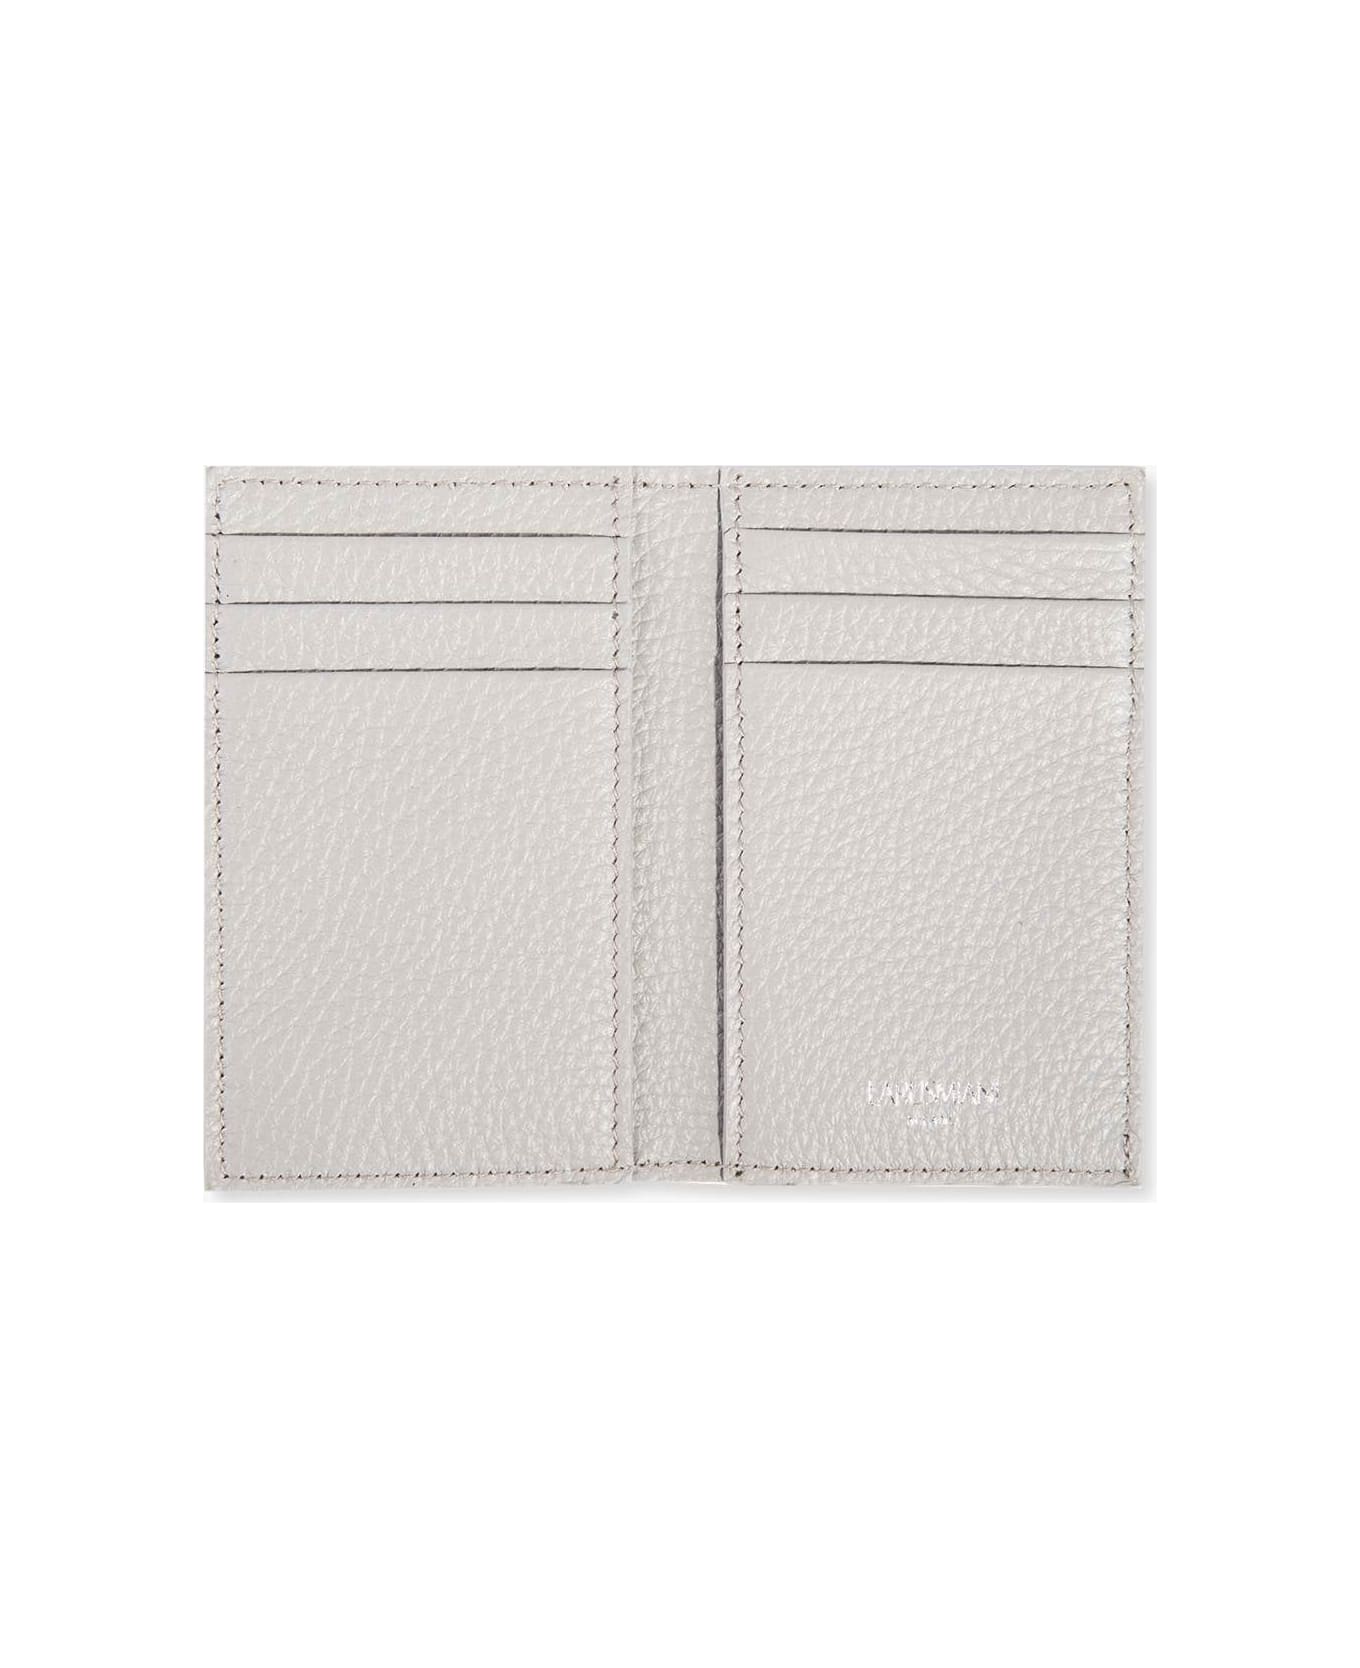 Larusmiani Card Holder 'amedeo' Wallet - DimGray